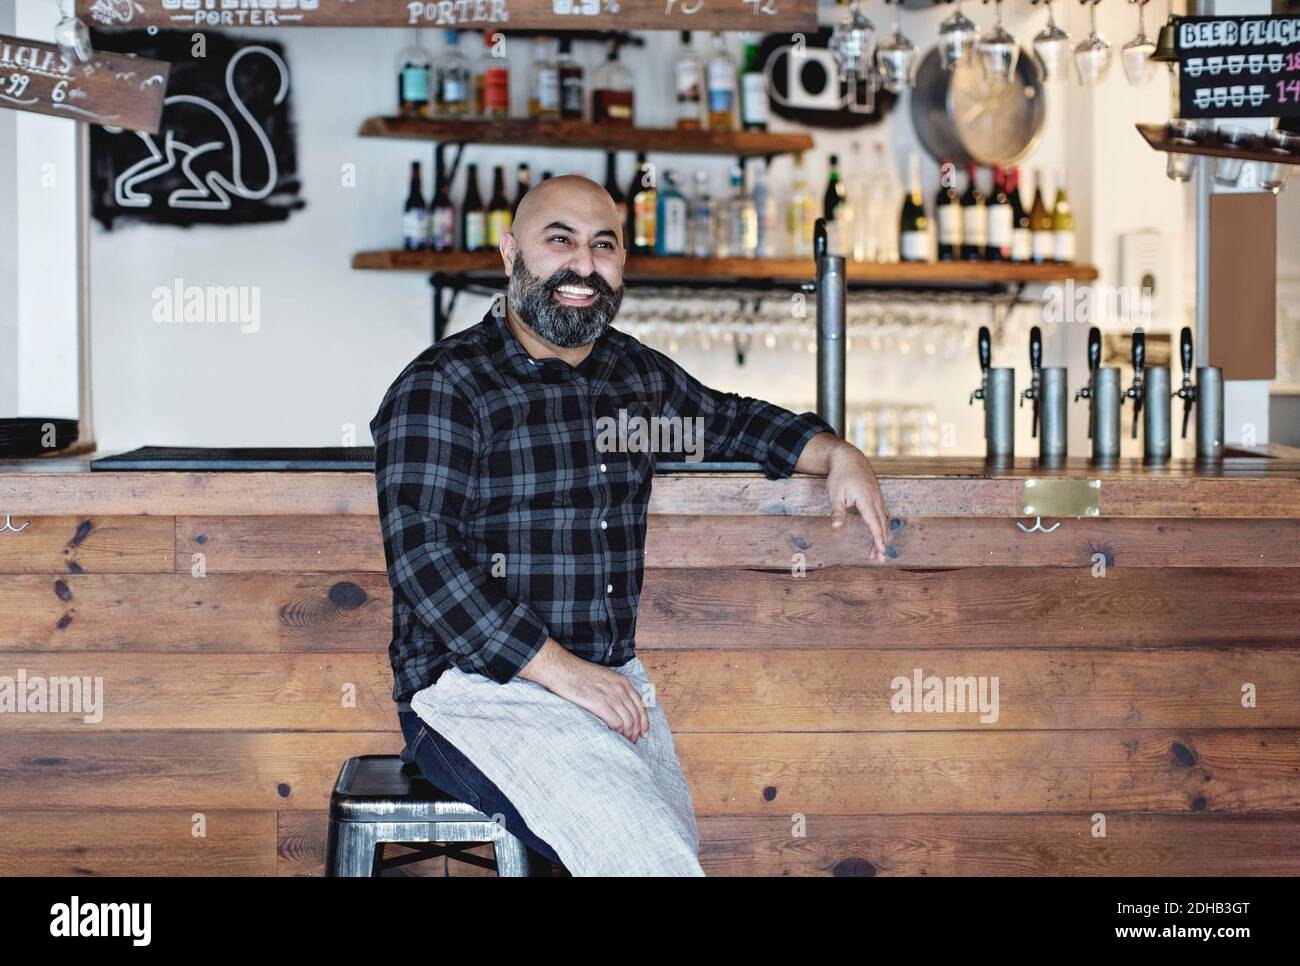 Confident smiling bartender sitting by bar counter Stock Photo